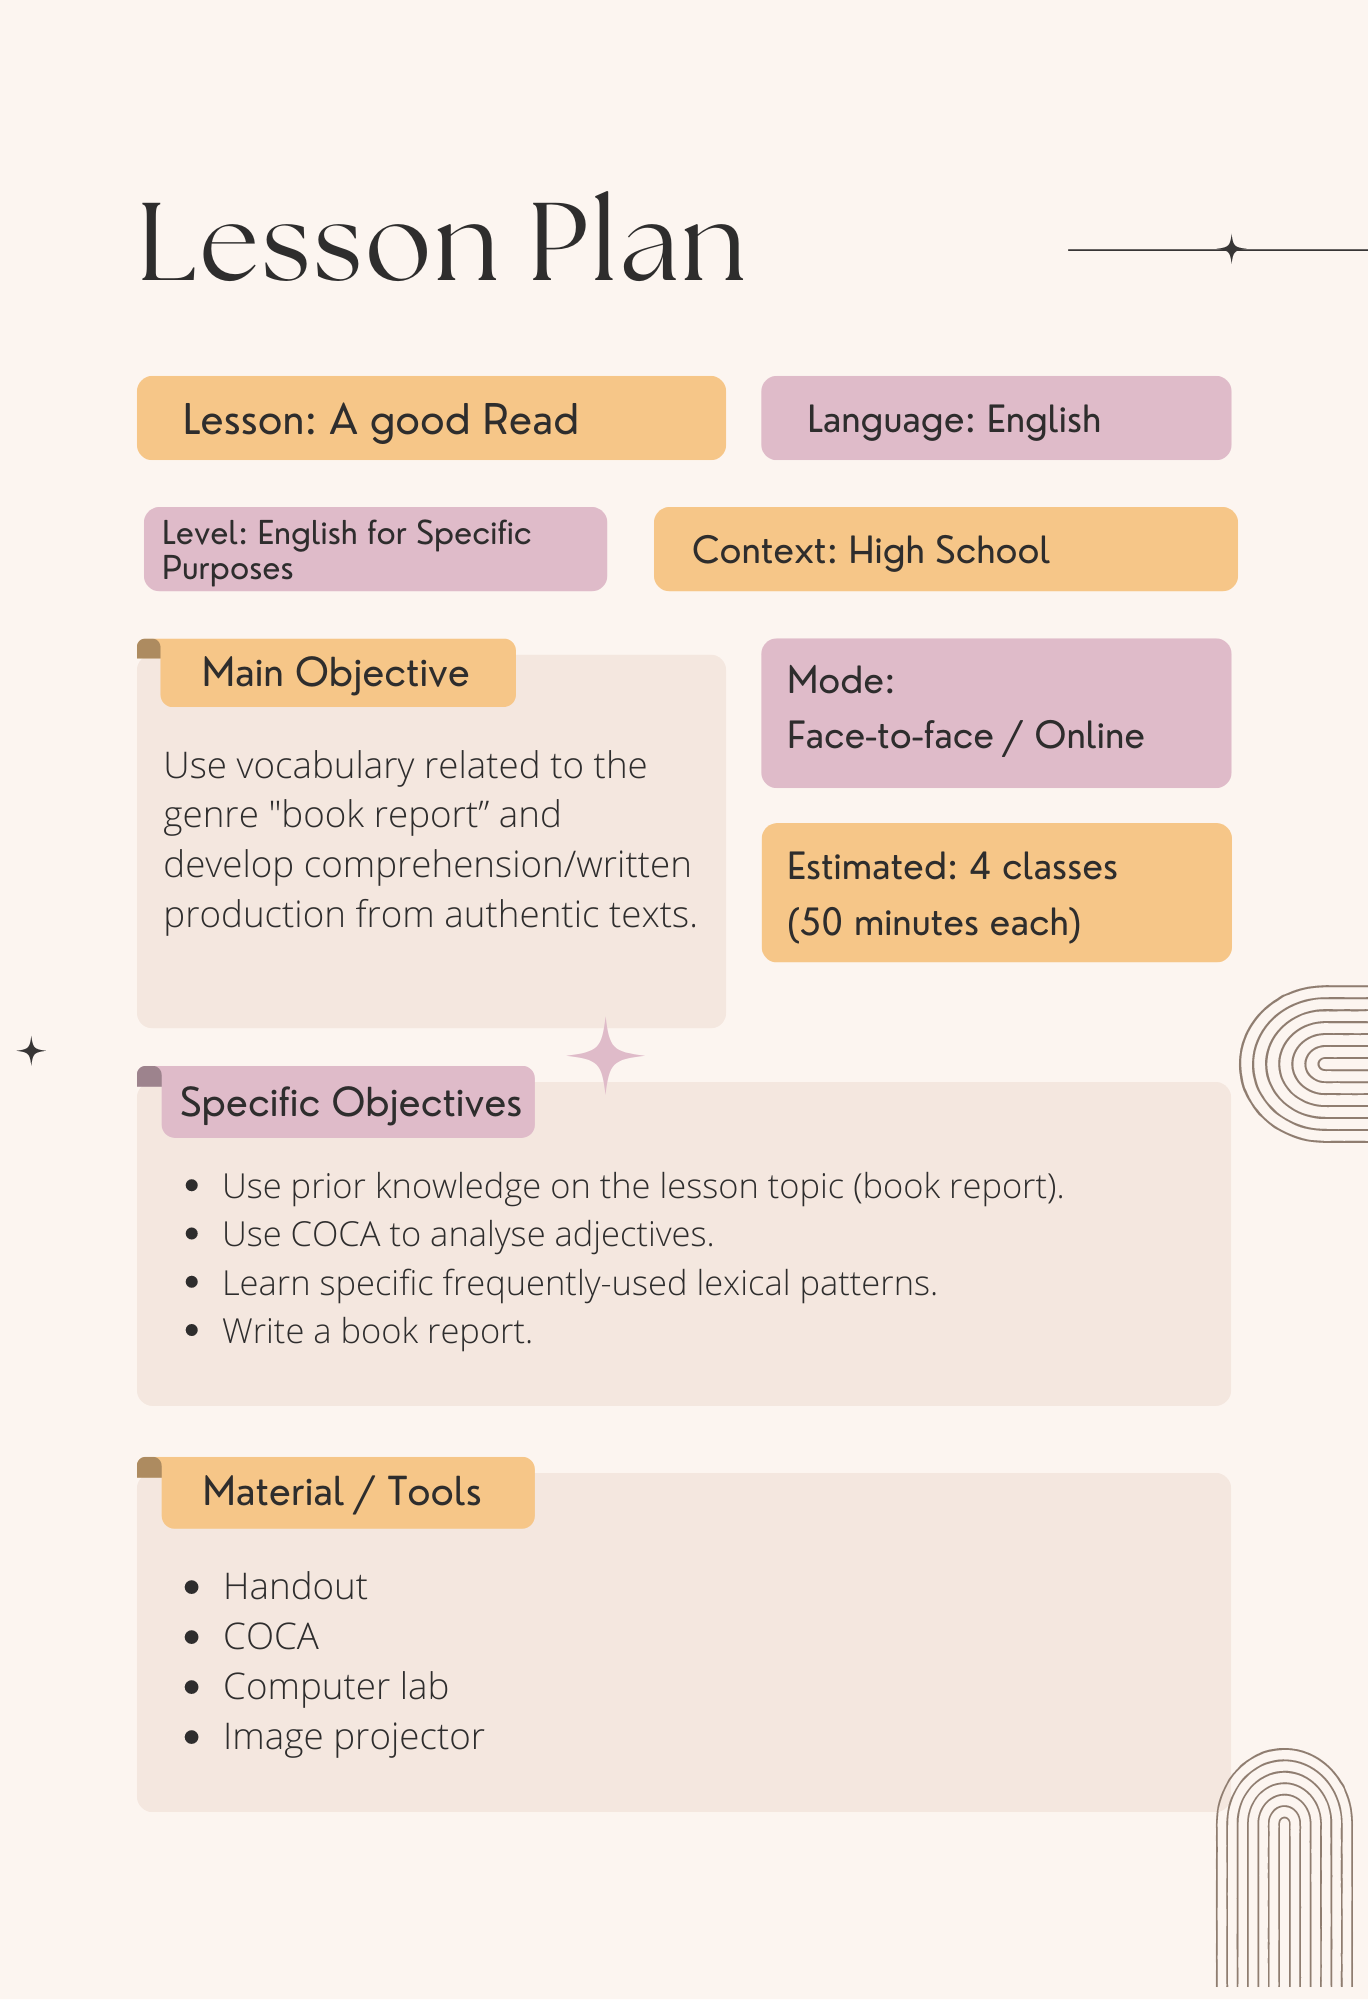 A text version of the lesson plan is available following the image.